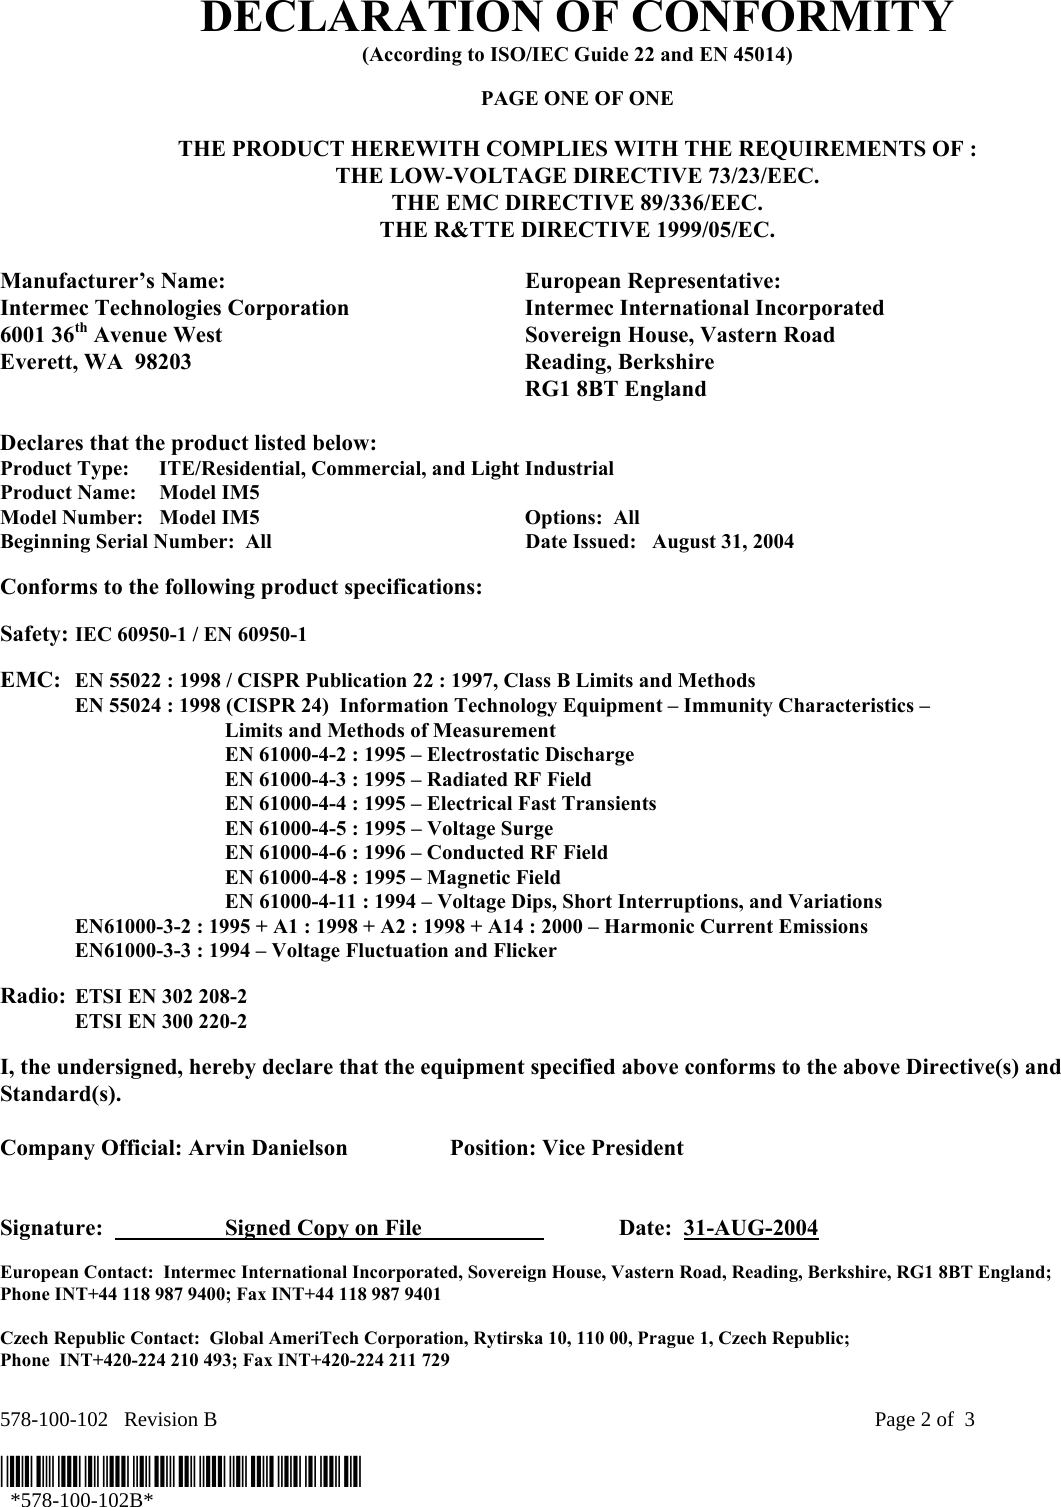 578-100-102   Revision B    Page 2 of  3  *578-100-102B*   *578-100-102B* DECLARATION OF CONFORMITY (According to ISO/IEC Guide 22 and EN 45014)  PAGE ONE OF ONE  THE PRODUCT HEREWITH COMPLIES WITH THE REQUIREMENTS OF : THE LOW-VOLTAGE DIRECTIVE 73/23/EEC. THE EMC DIRECTIVE 89/336/EEC. THE R&amp;TTE DIRECTIVE 1999/05/EC.  Manufacturer’s Name:  European Representative: Intermec Technologies Corporation  Intermec International Incorporated 6001 36th Avenue West  Sovereign House, Vastern Road Everett, WA  98203  Reading, Berkshire   RG1 8BT England  Declares that the product listed below: Product Type:  ITE/Residential, Commercial, and Light Industrial Product Name:    Model IM5 Model Number:  Model IM5  Options:  All   Beginning Serial Number:  All  Date Issued:   August 31, 2004  Conforms to the following product specifications:   Safety: IEC 60950-1 / EN 60950-1     EMC:  EN 55022 : 1998 / CISPR Publication 22 : 1997, Class B Limits and Methods   EN 55024 : 1998 (CISPR 24)  Information Technology Equipment – Immunity Characteristics –        Limits and Methods of Measurement     EN 61000-4-2 : 1995 – Electrostatic Discharge     EN 61000-4-3 : 1995 – Radiated RF Field     EN 61000-4-4 : 1995 – Electrical Fast Transients     EN 61000-4-5 : 1995 – Voltage Surge     EN 61000-4-6 : 1996 – Conducted RF Field     EN 61000-4-8 : 1995 – Magnetic Field     EN 61000-4-11 : 1994 – Voltage Dips, Short Interruptions, and Variations   EN61000-3-2 : 1995 + A1 : 1998 + A2 : 1998 + A14 : 2000 – Harmonic Current Emissions   EN61000-3-3 : 1994 – Voltage Fluctuation and Flicker  Radio:  ETSI EN 302 208-2    ETSI EN 300 220-2  I, the undersigned, hereby declare that the equipment specified above conforms to the above Directive(s) and Standard(s).  Company Official: Arvin Danielson  Position: Vice President   Signature:    Signed Copy on File     Date:  31-AUG-2004 European Contact:  Intermec International Incorporated, Sovereign House, Vastern Road, Reading, Berkshire, RG1 8BT England;  Phone INT+44 118 987 9400; Fax INT+44 118 987 9401  Czech Republic Contact:  Global AmeriTech Corporation, Rytirska 10, 110 00, Prague 1, Czech Republic;  Phone  INT+420-224 210 493; Fax INT+420-224 211 729 